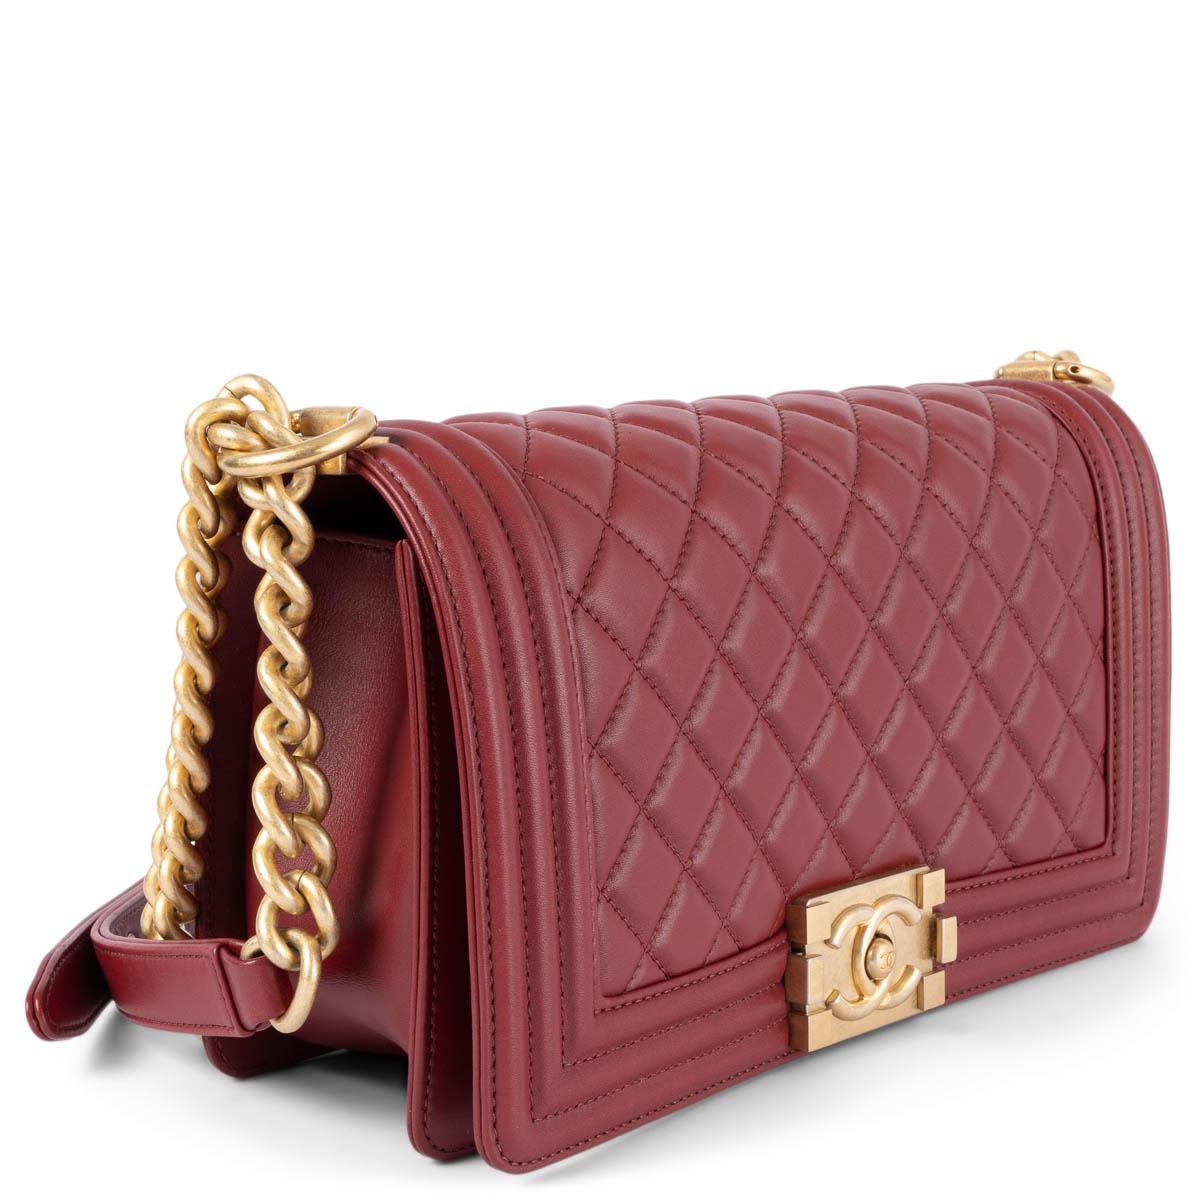 100% authentic Chanel Medium Boy shoulder bag in burgundy quilted lambskin featuring mat gold-tone hardware. Lined in burgundy grosgrain with an open pocket against the back. Excellent condition. Comes with dust bag, box and authenticity card.